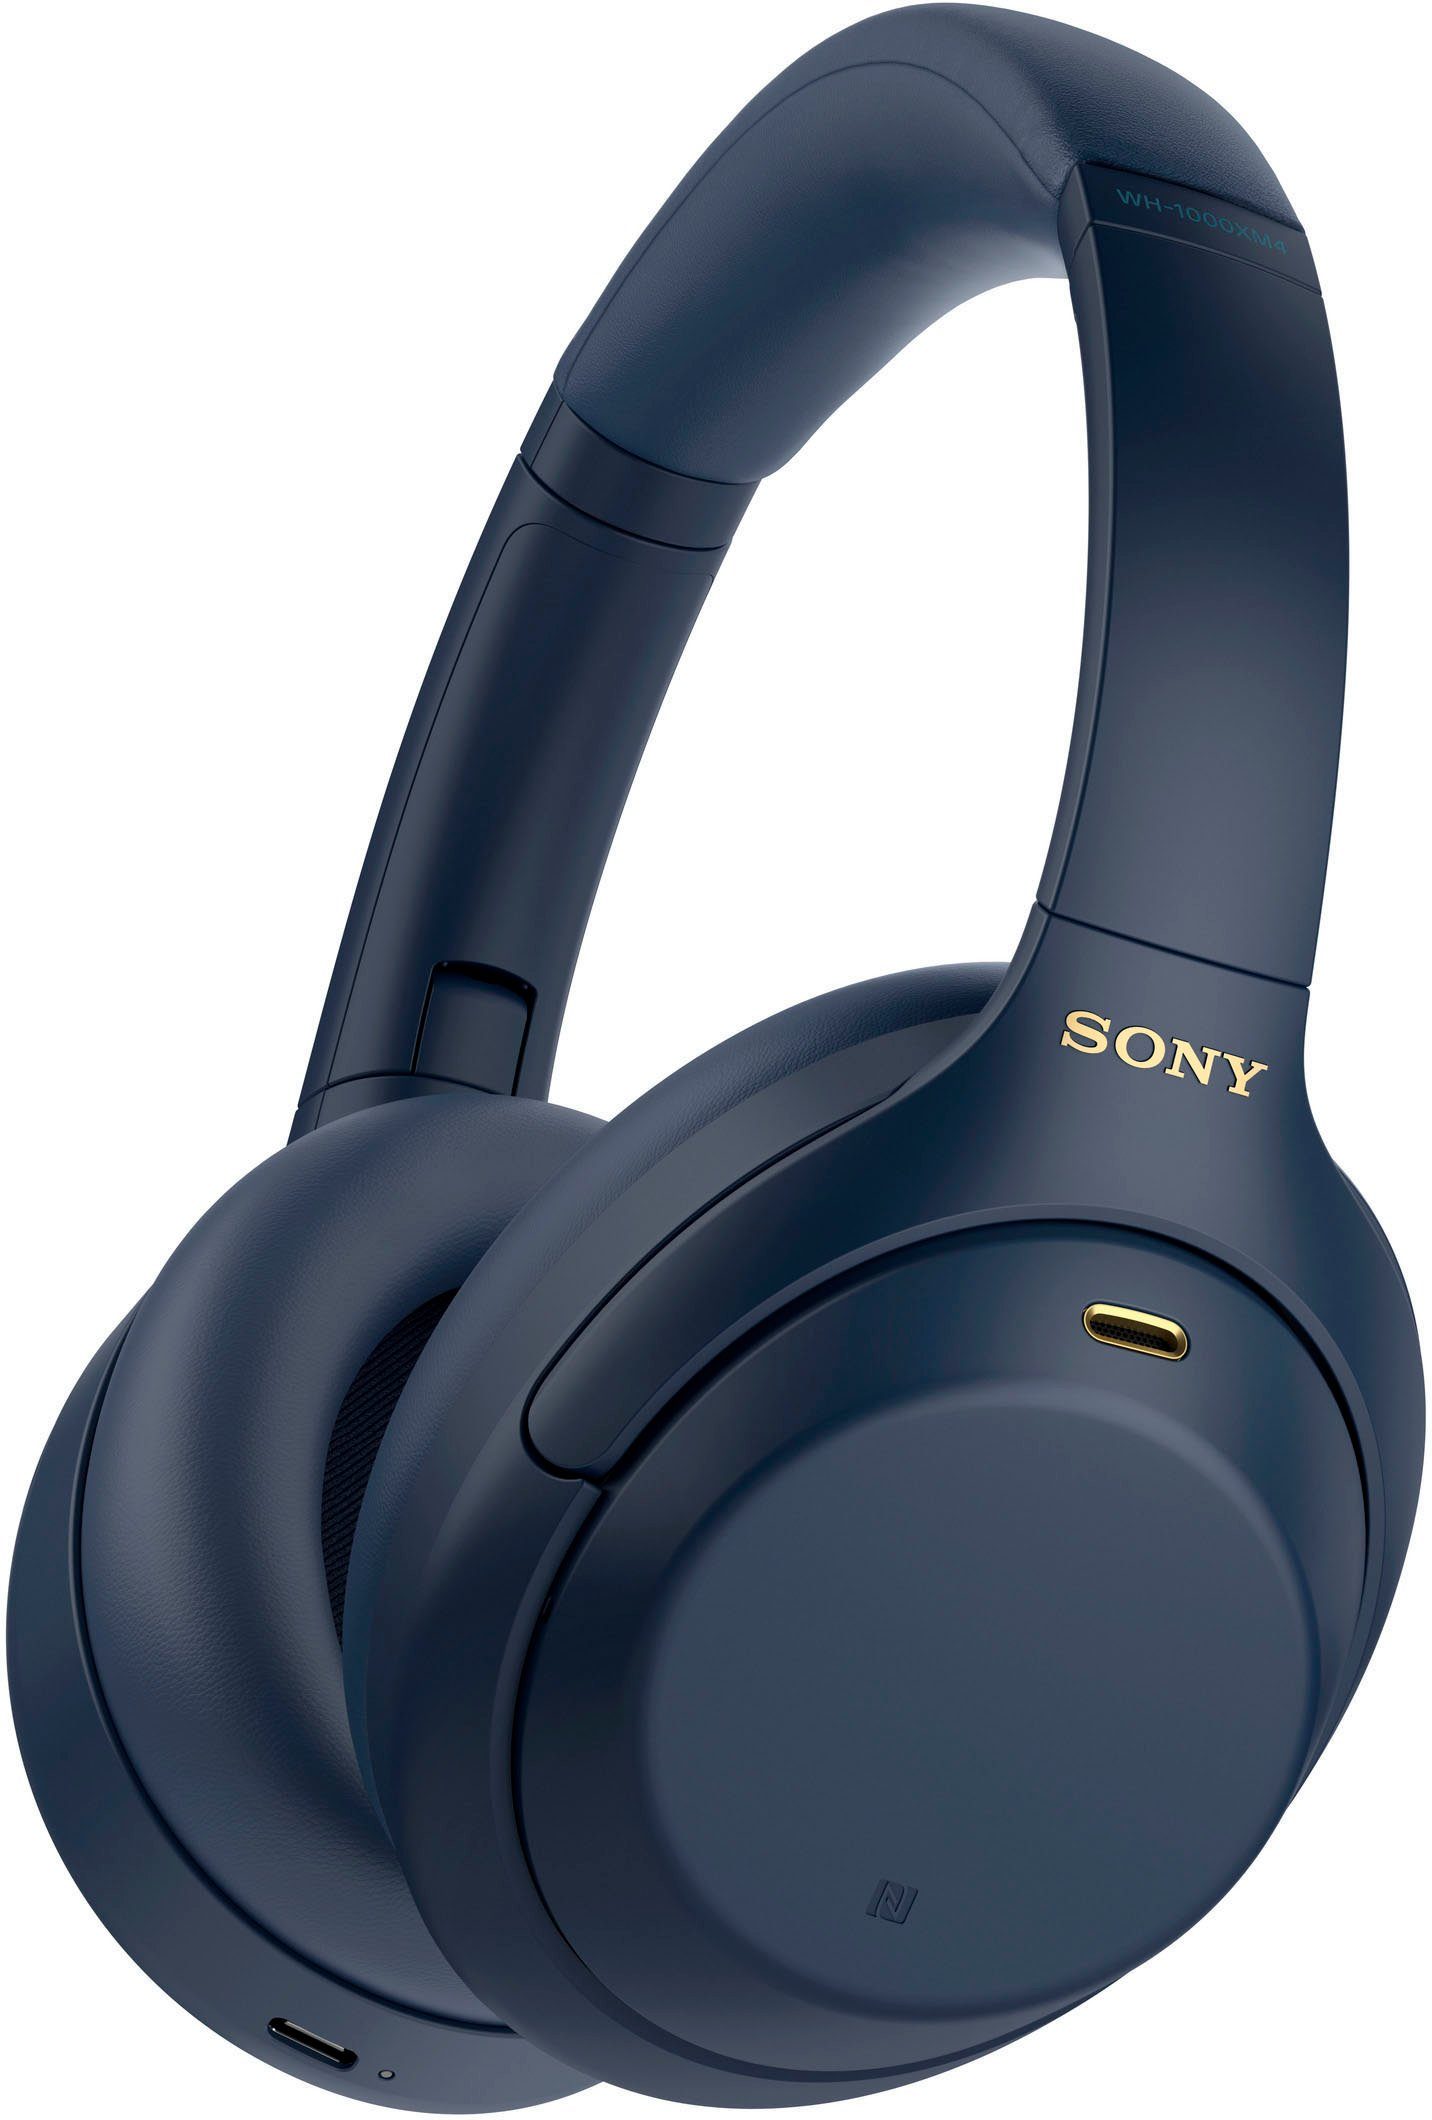 Touch Verbindung Sony via Sensor, WH-1000XM4 Bluetooth, blau One-Touch Schnellladefunktion) NFC, (Noise-Cancelling, Over-Ear-Kopfhörer NFC, kabelloser